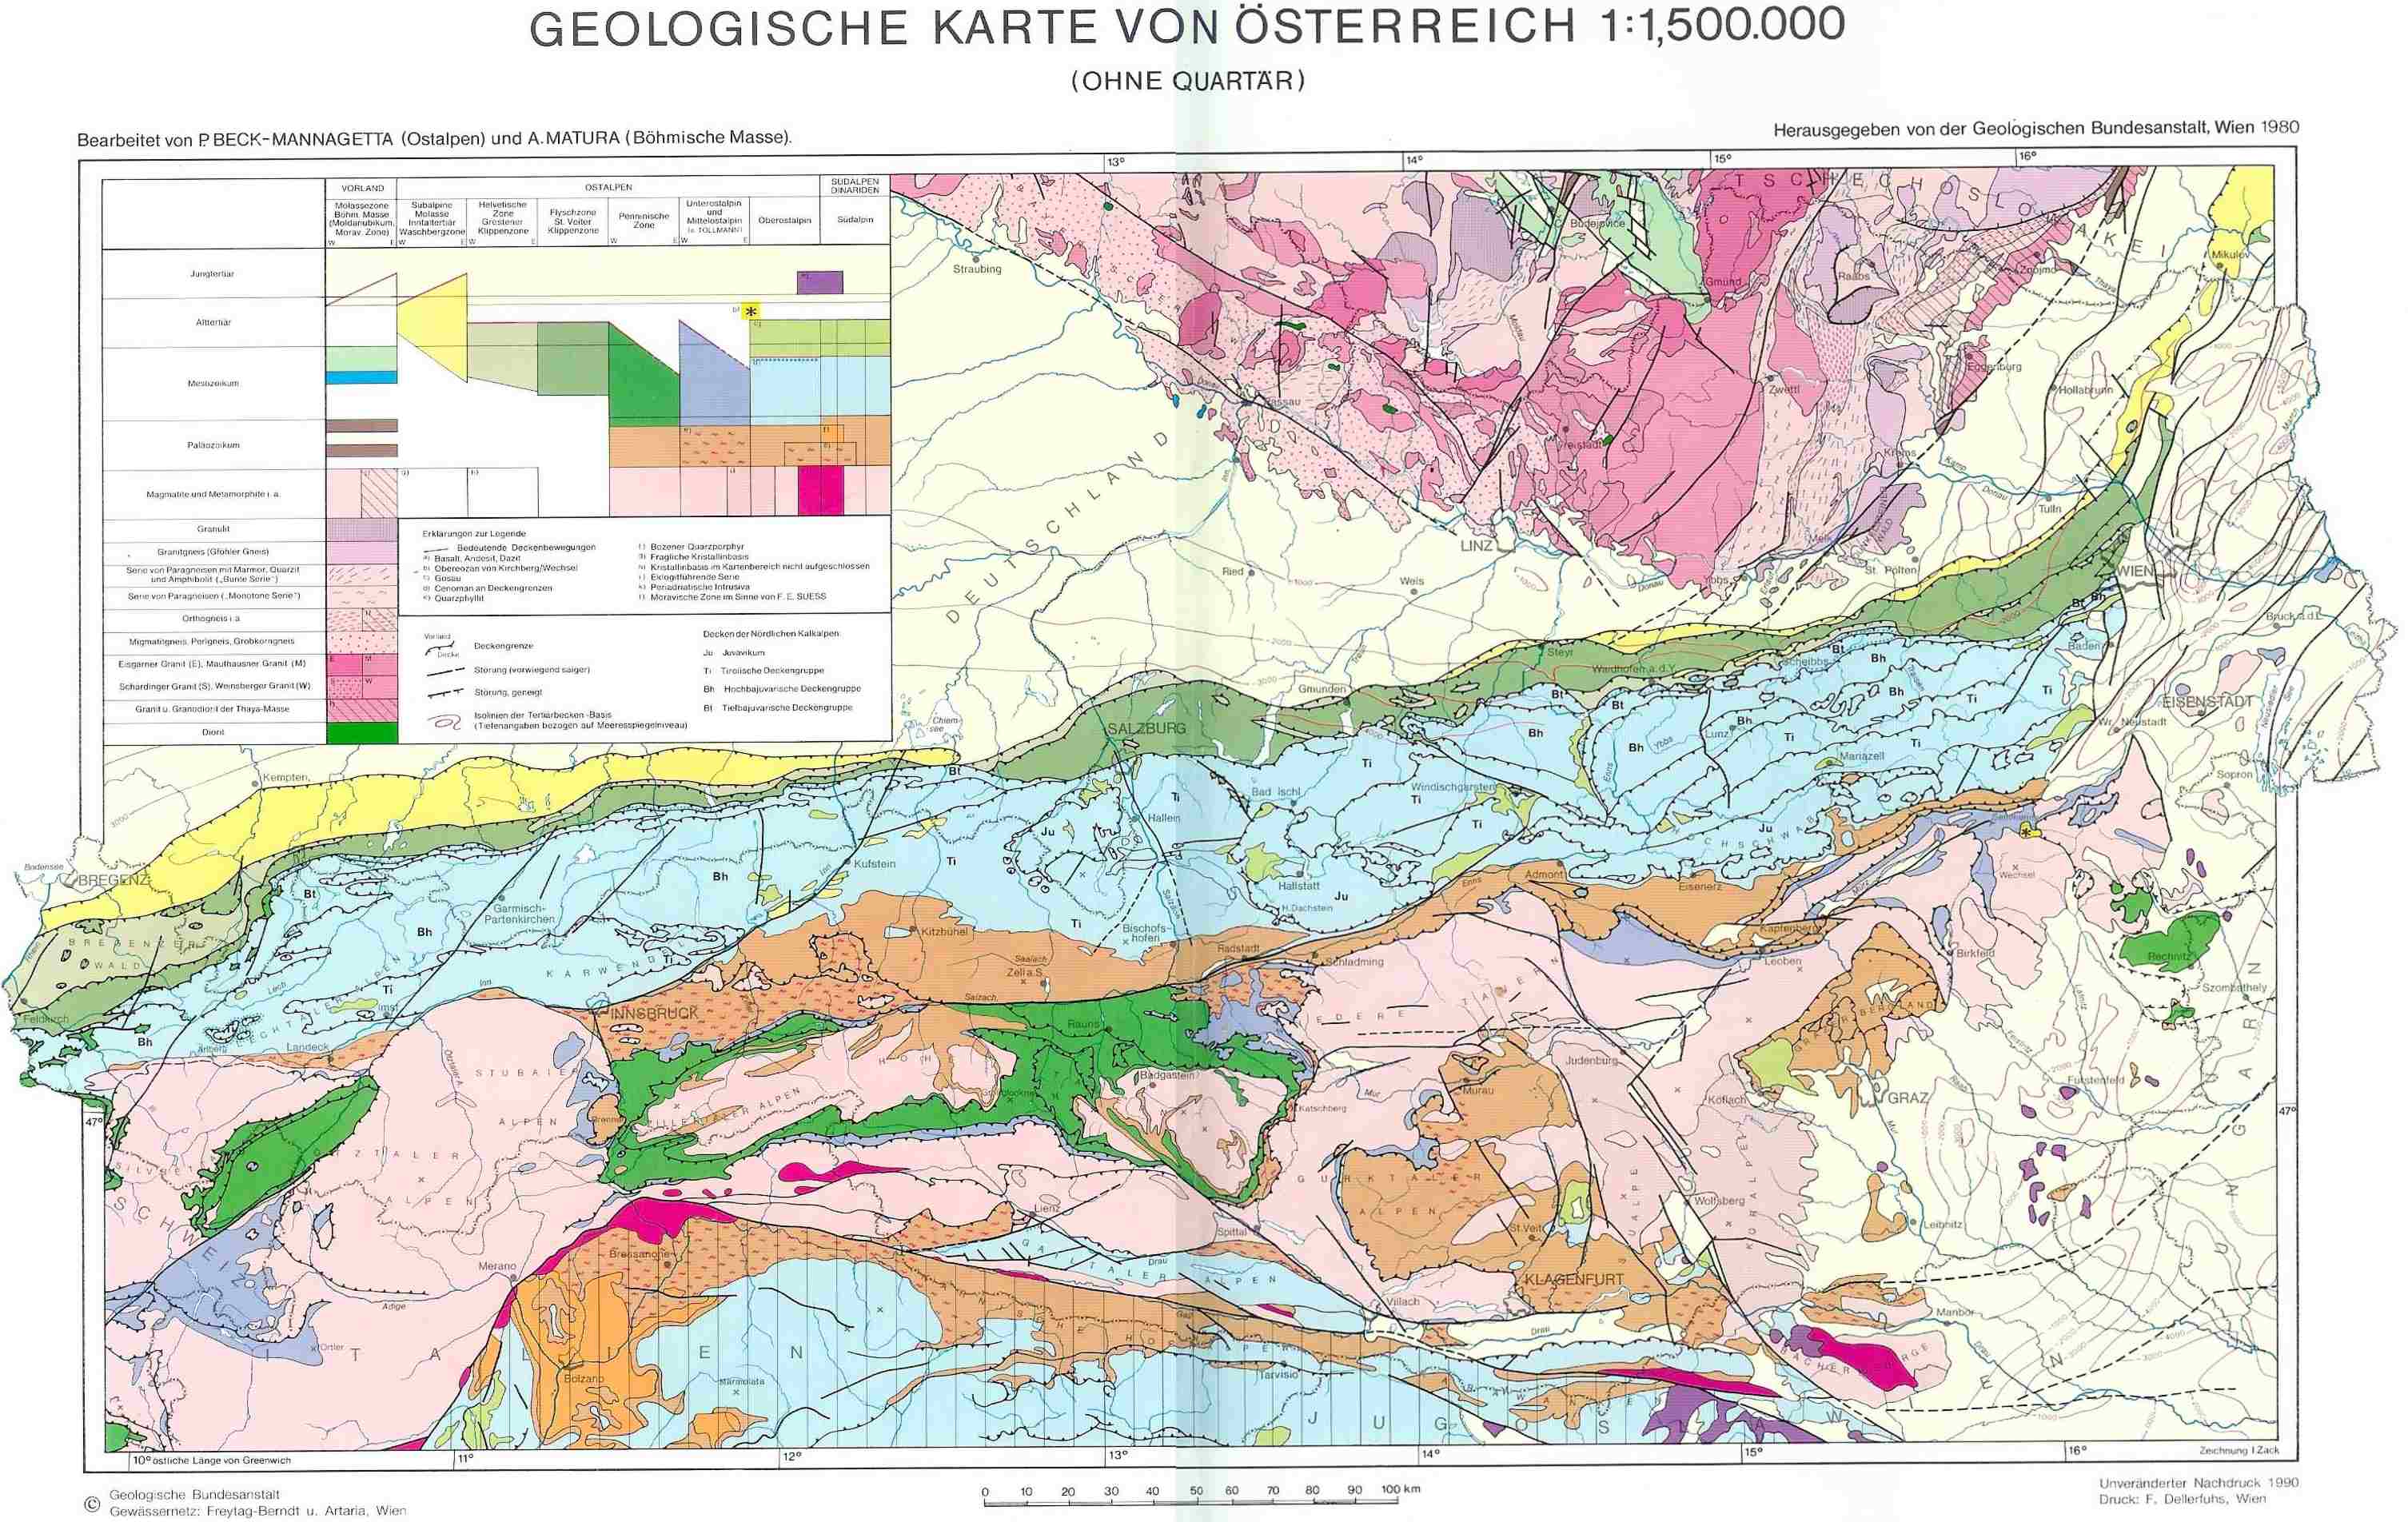 Geological Map of Austria